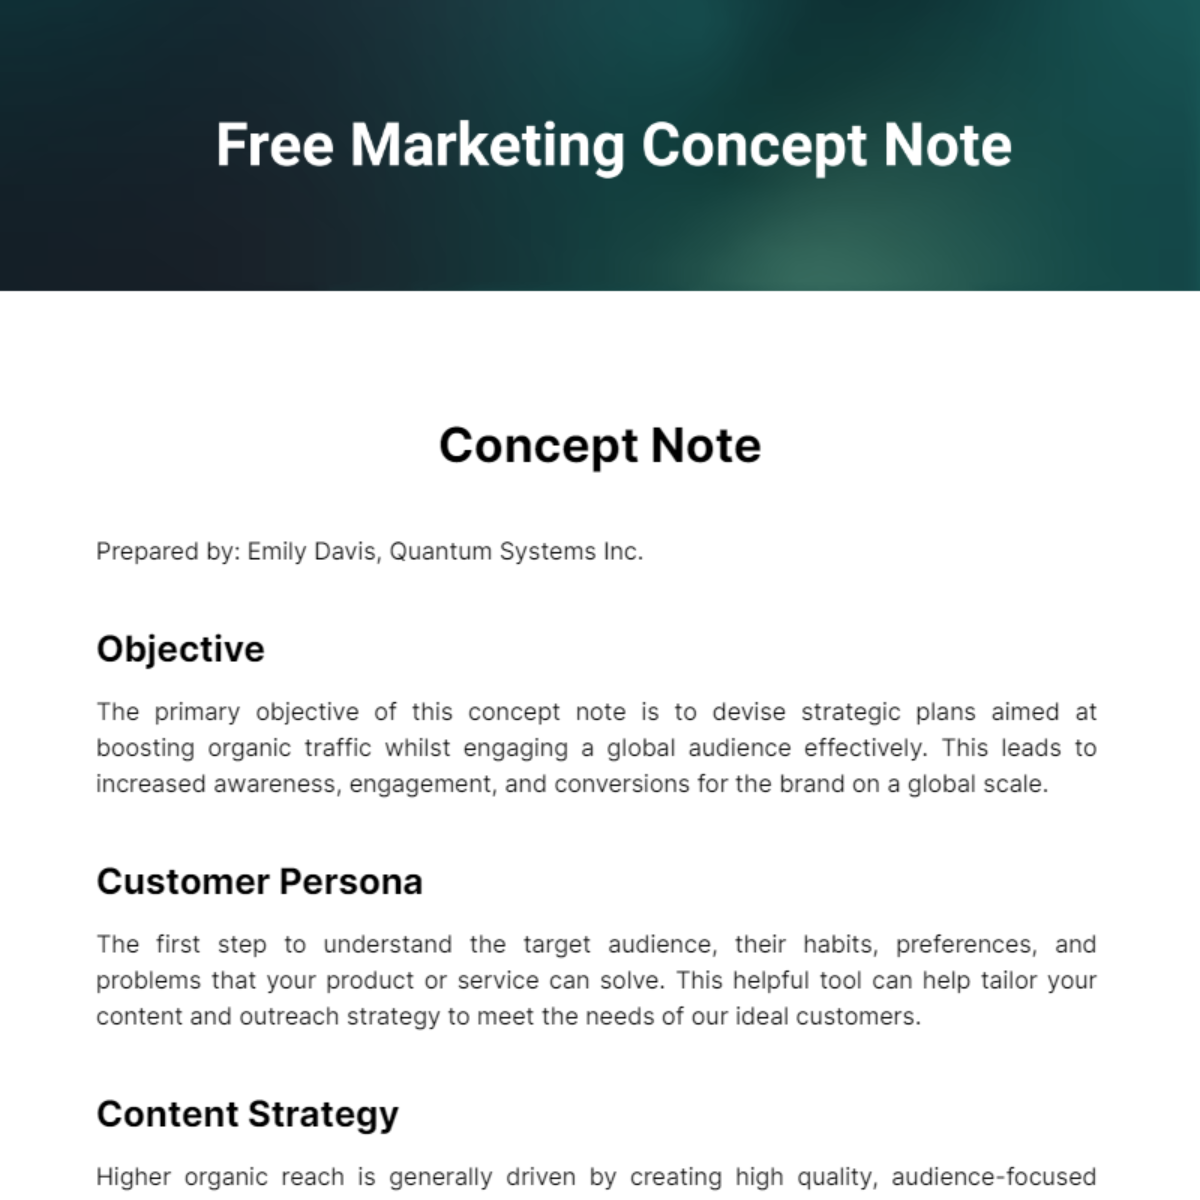 Free Marketing Concept Note Template